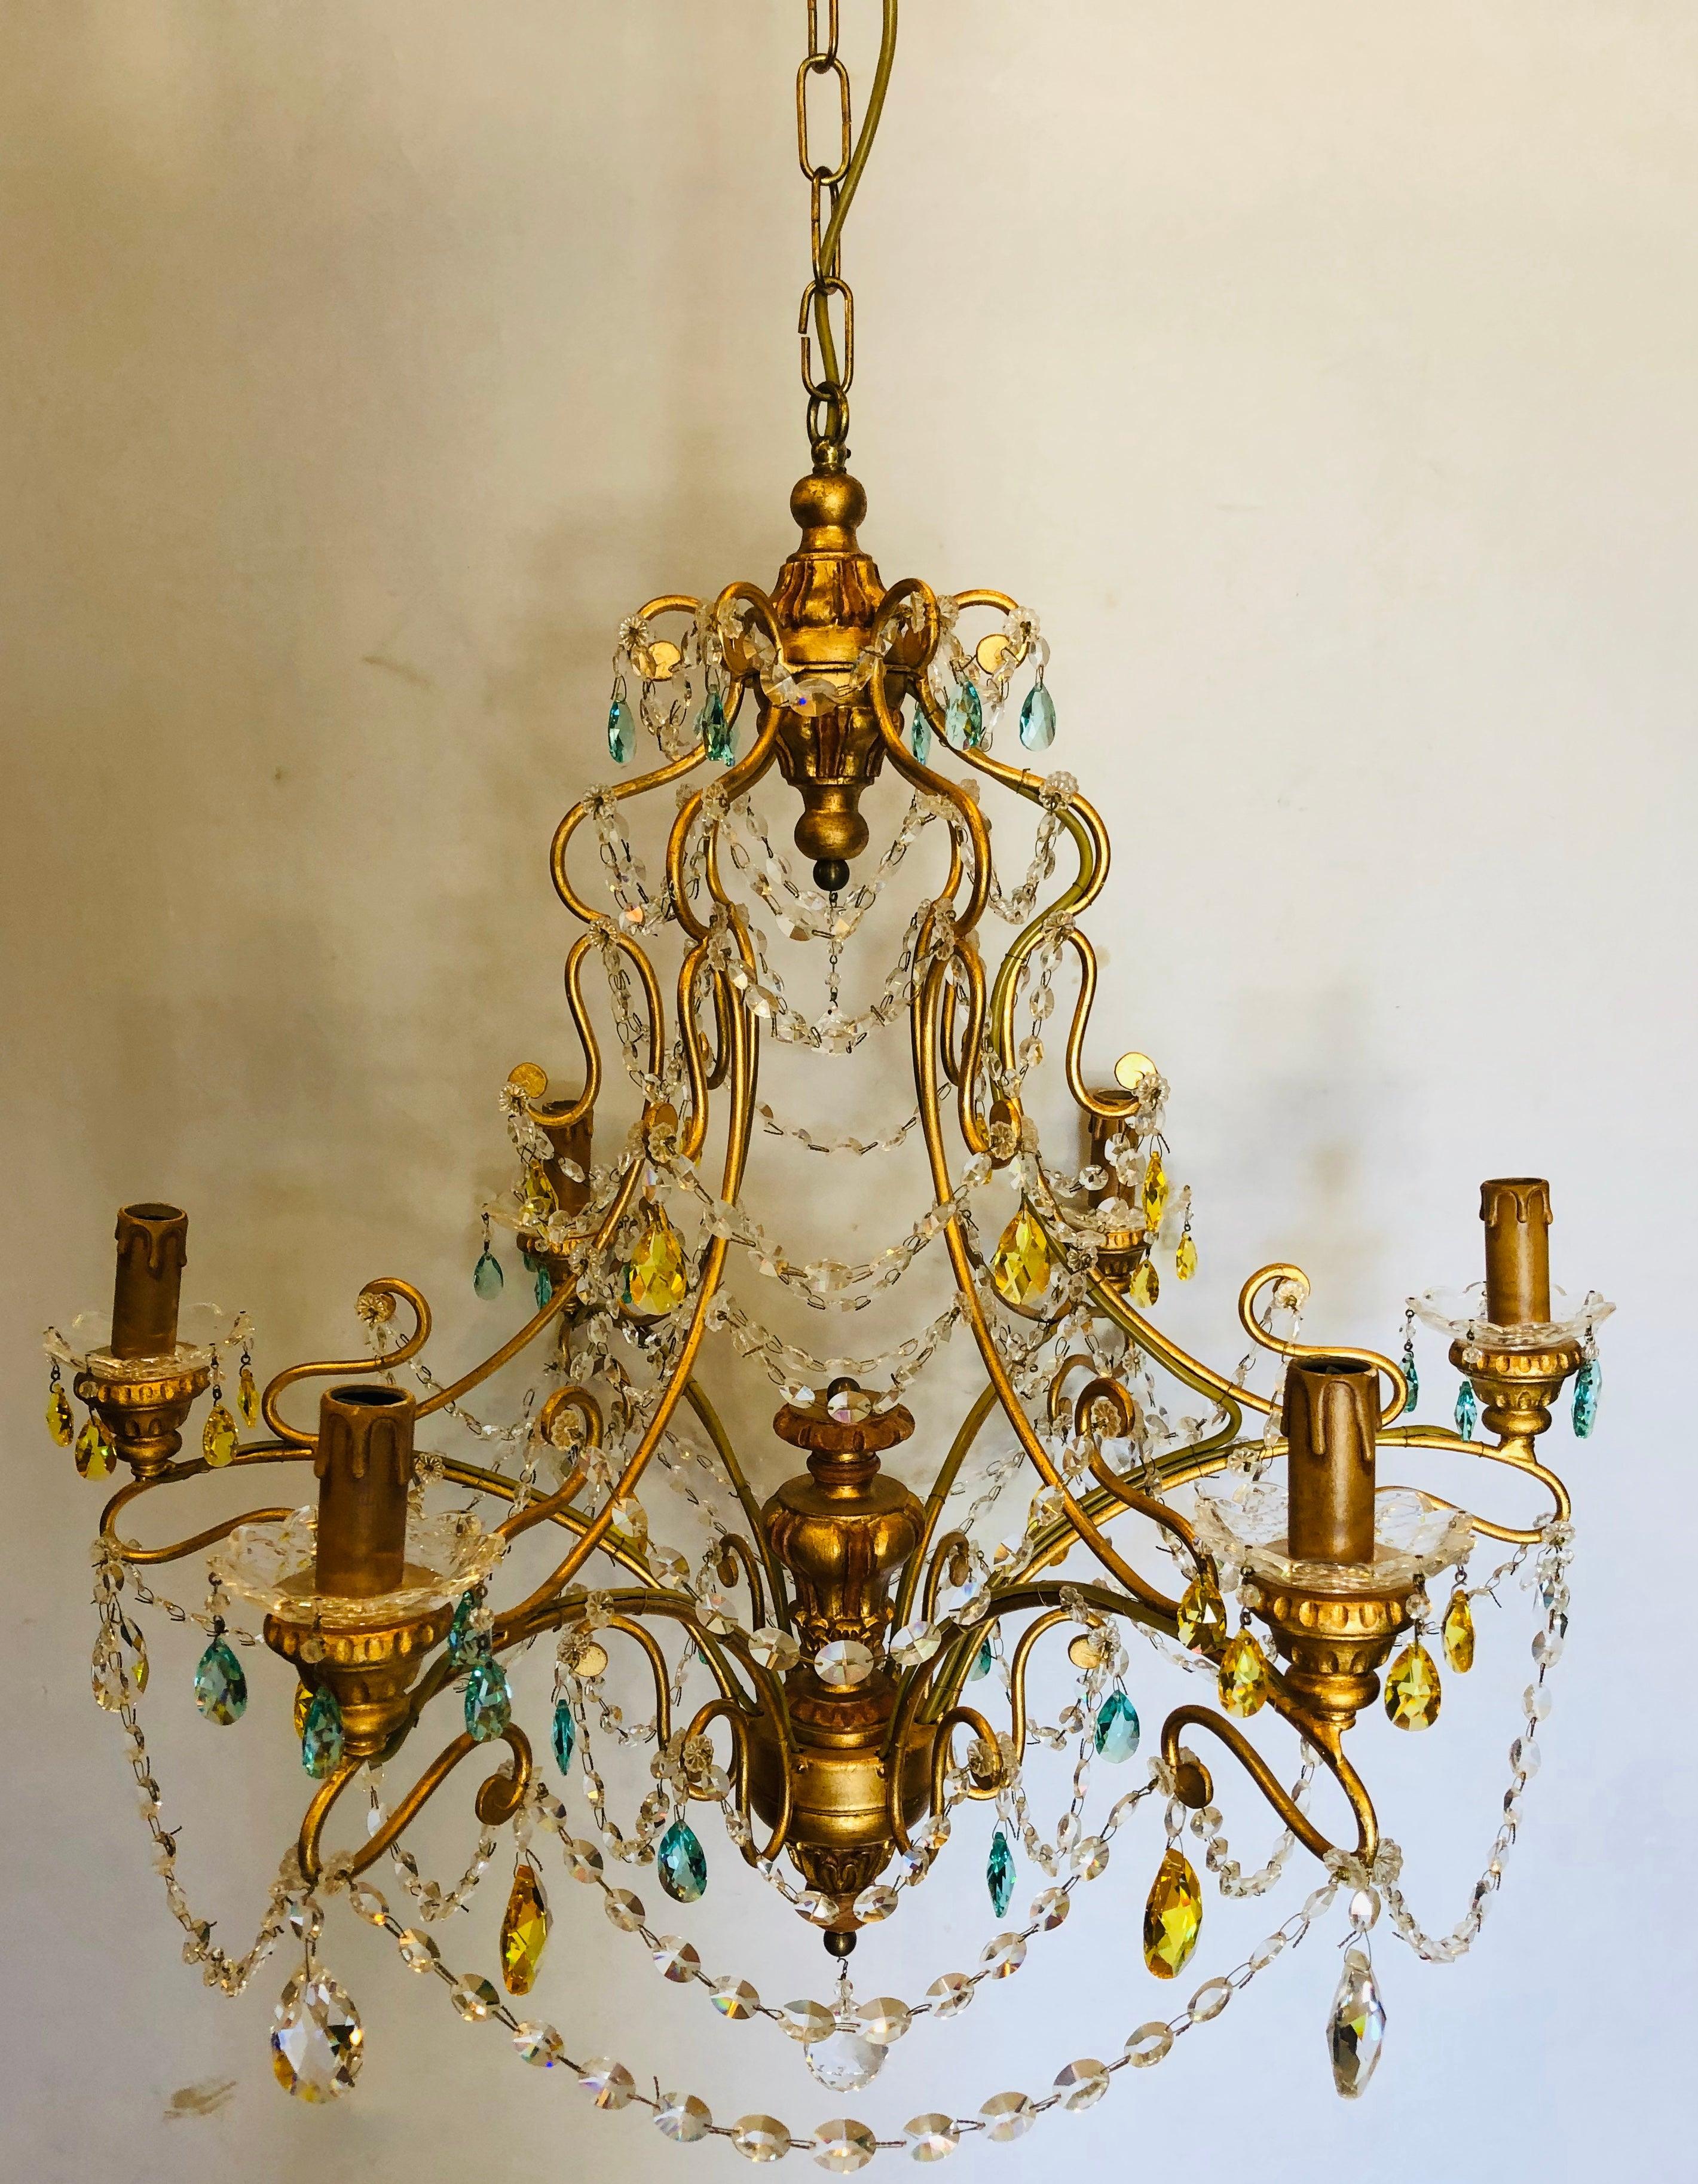 Neoclassical handcrafted Italian gilt metal and crystal chandelier. This sleek and stylish Murano crystal chandelier is reminiscent of the workmanship that has made Alba lighting a household name in the lighting industry. The fine wrought iron gilt